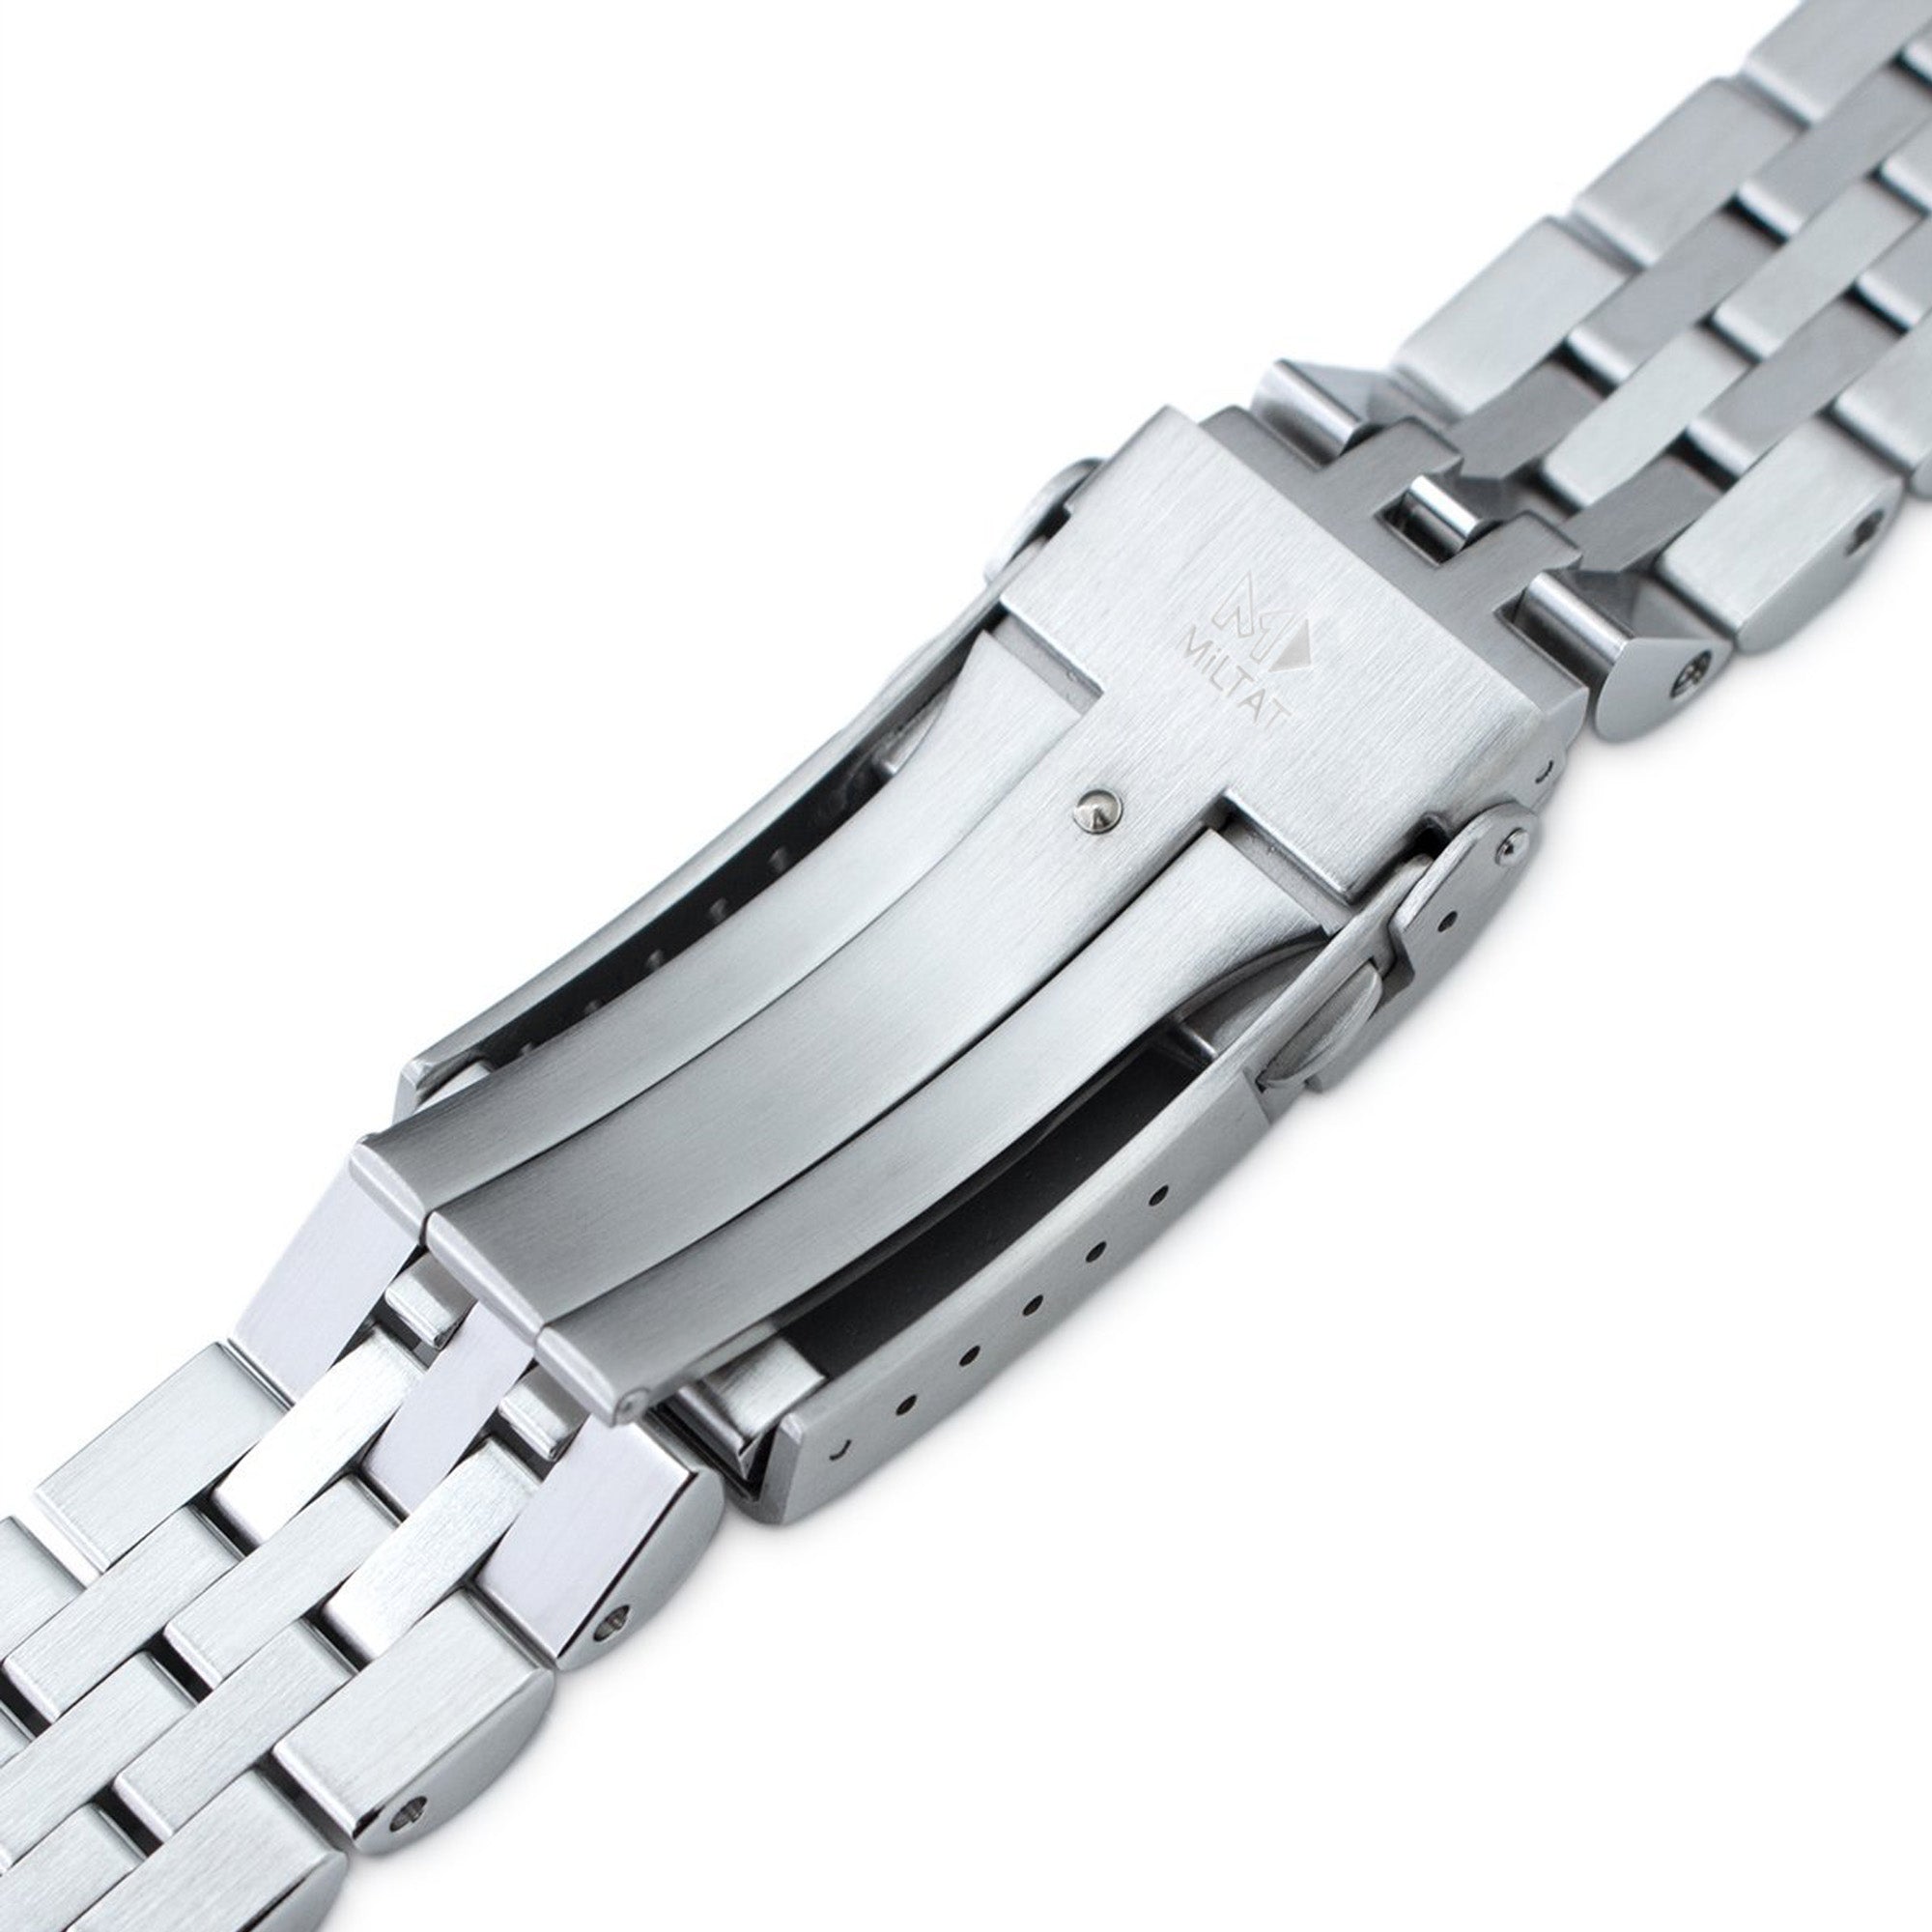 20mm Angus-J Louis JUB Watch Band compatible with Seiko Alpinist SARB017 (or Hamilton Khaki H70455733), 316L Stainless Steel Brushed V-Clasp